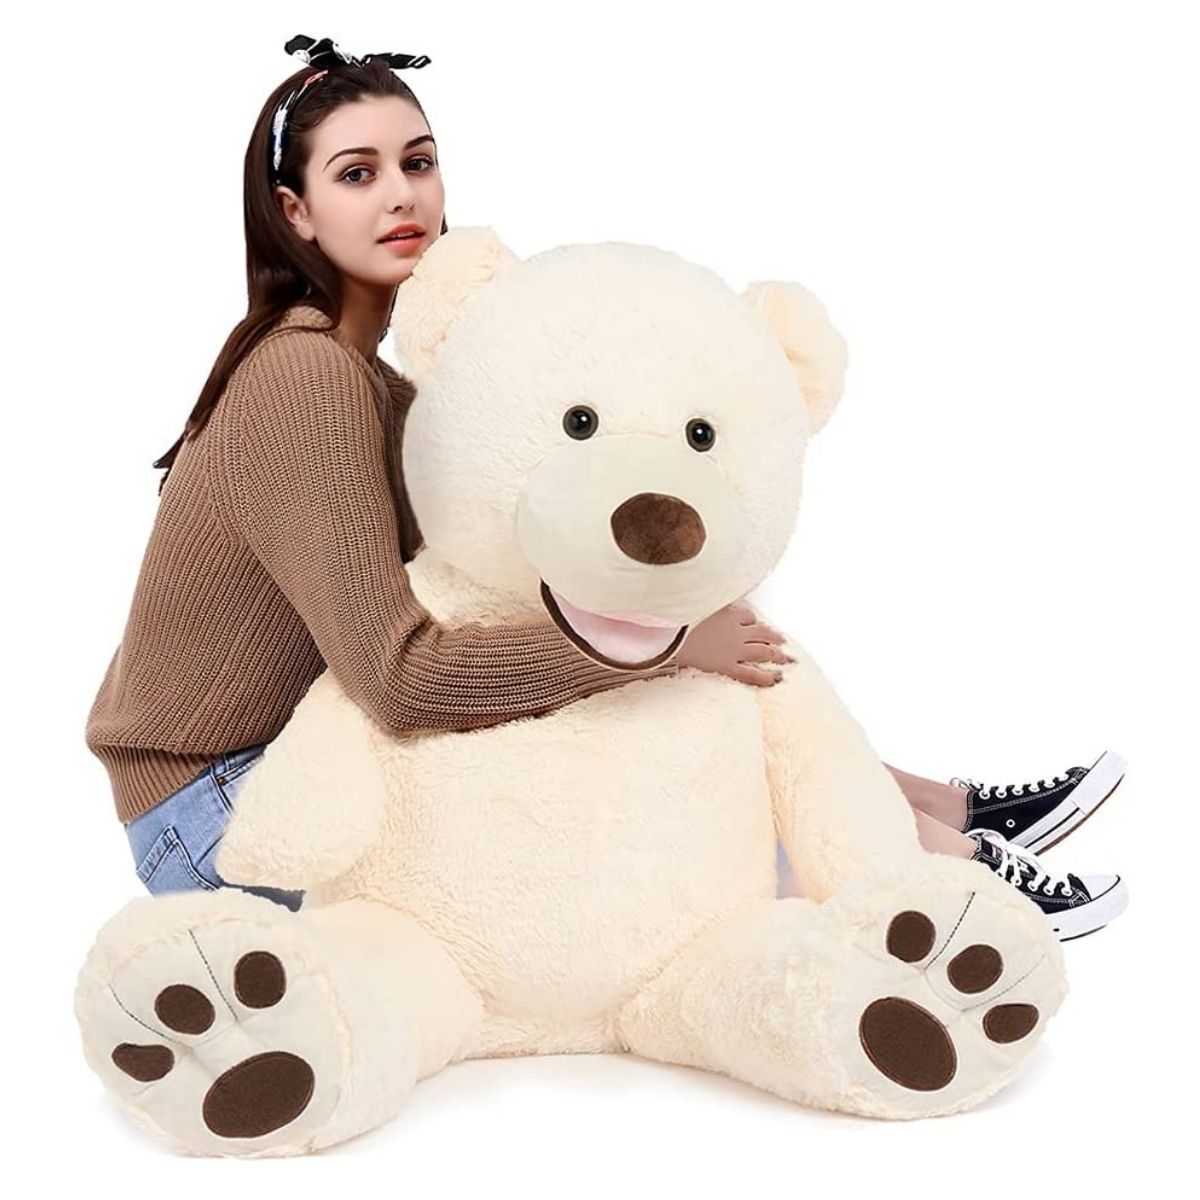 MorisMos Big Teddy Bear Stuffed Animal with Footprints Plush Toy Gifts for Girlfriend Valentine's Day